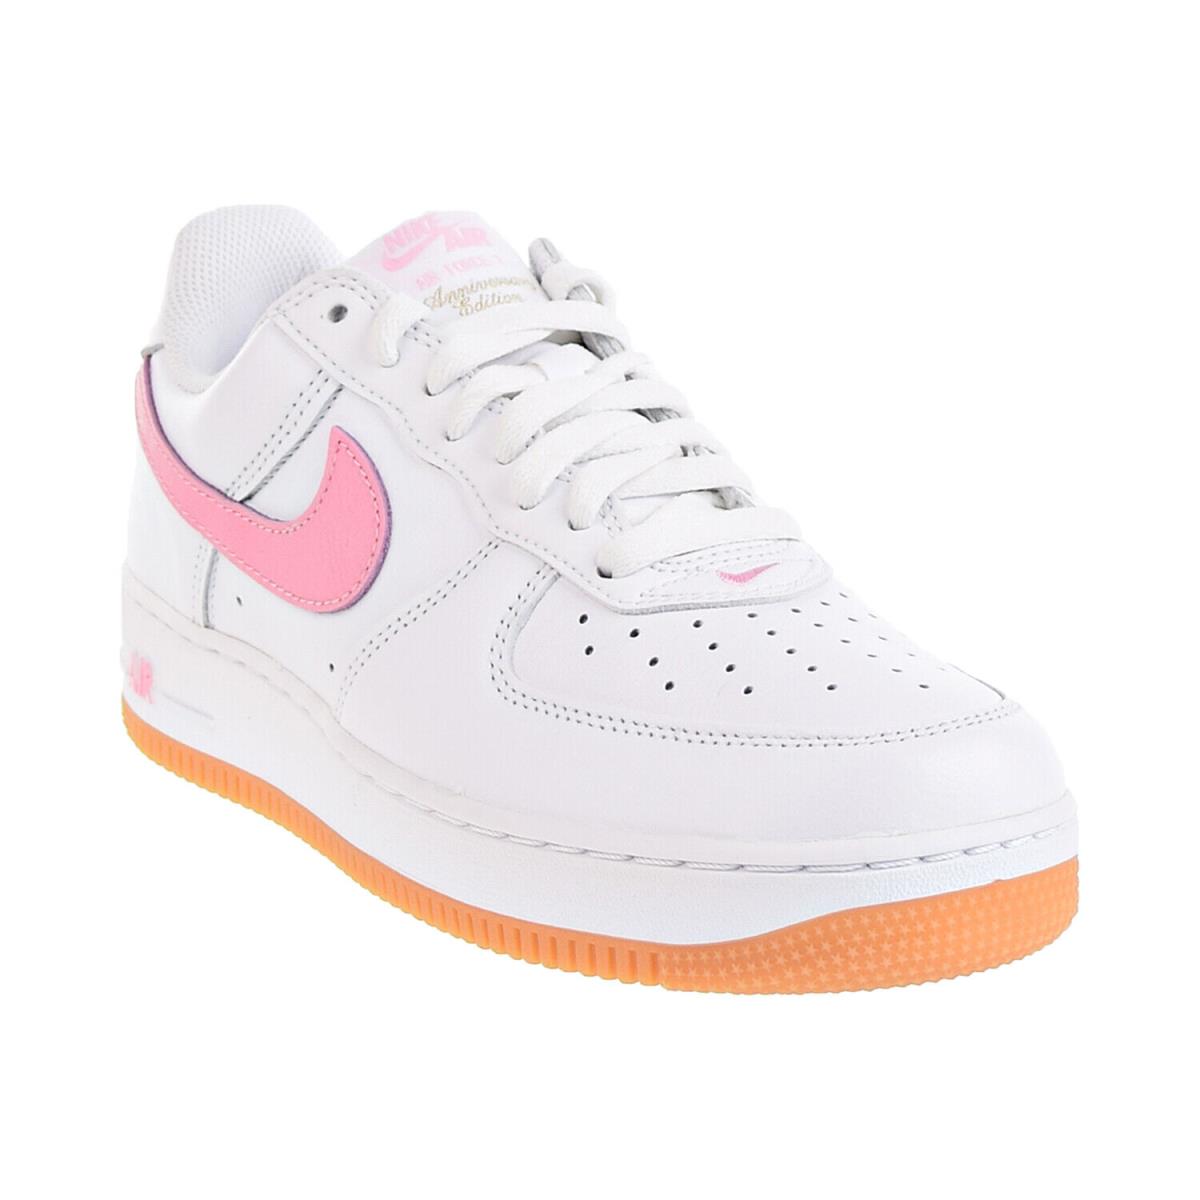 Nike Air Force 1 Low Retro Men`s Shoes White-pink-gum Yellow DM0576-101 - White-Pink-Gum Yellow